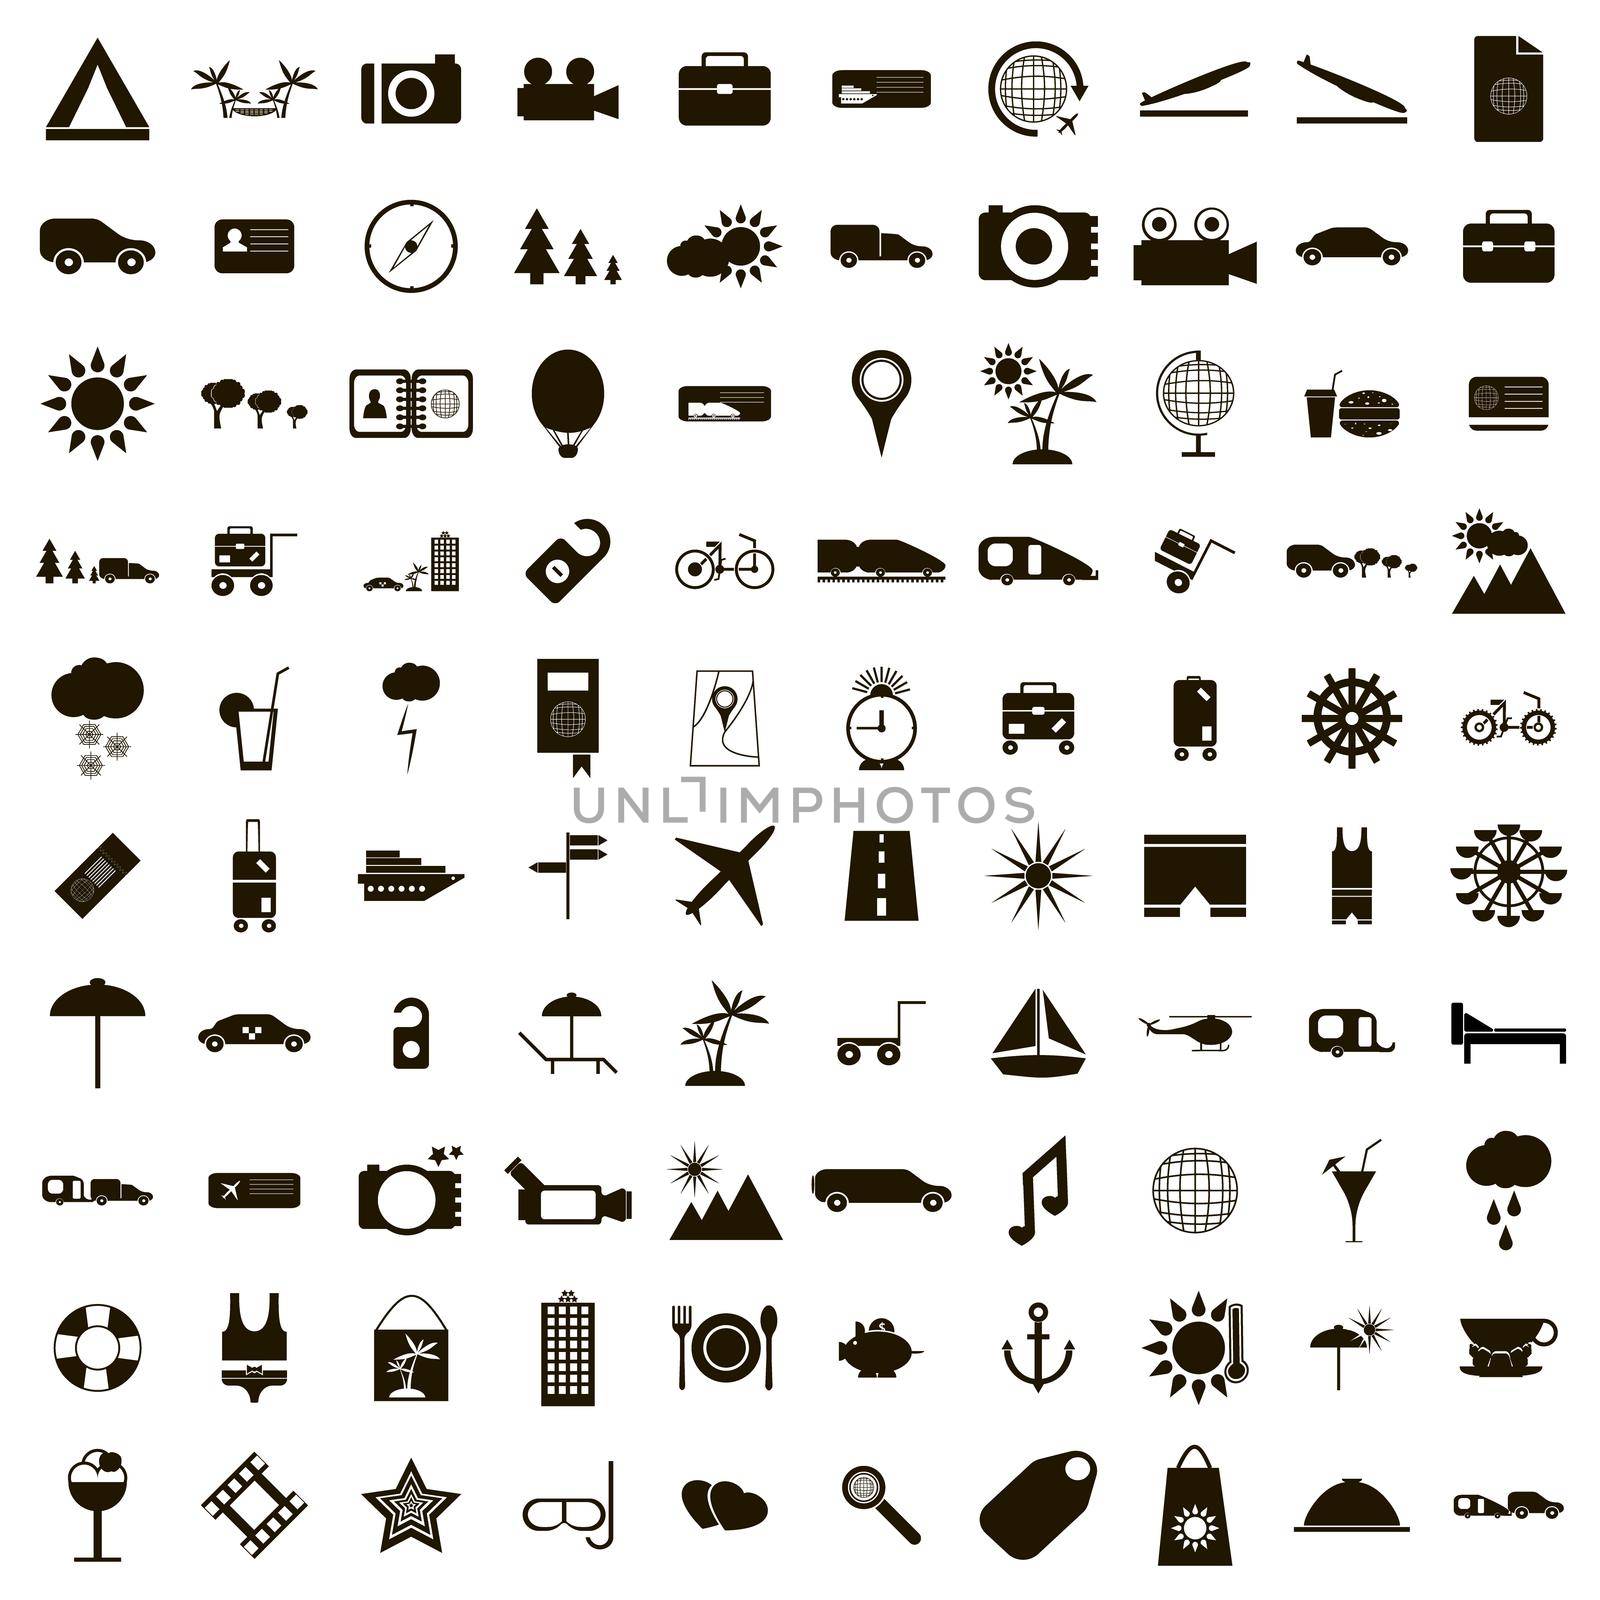 100 Travel Icons set, simple style by ylivdesign